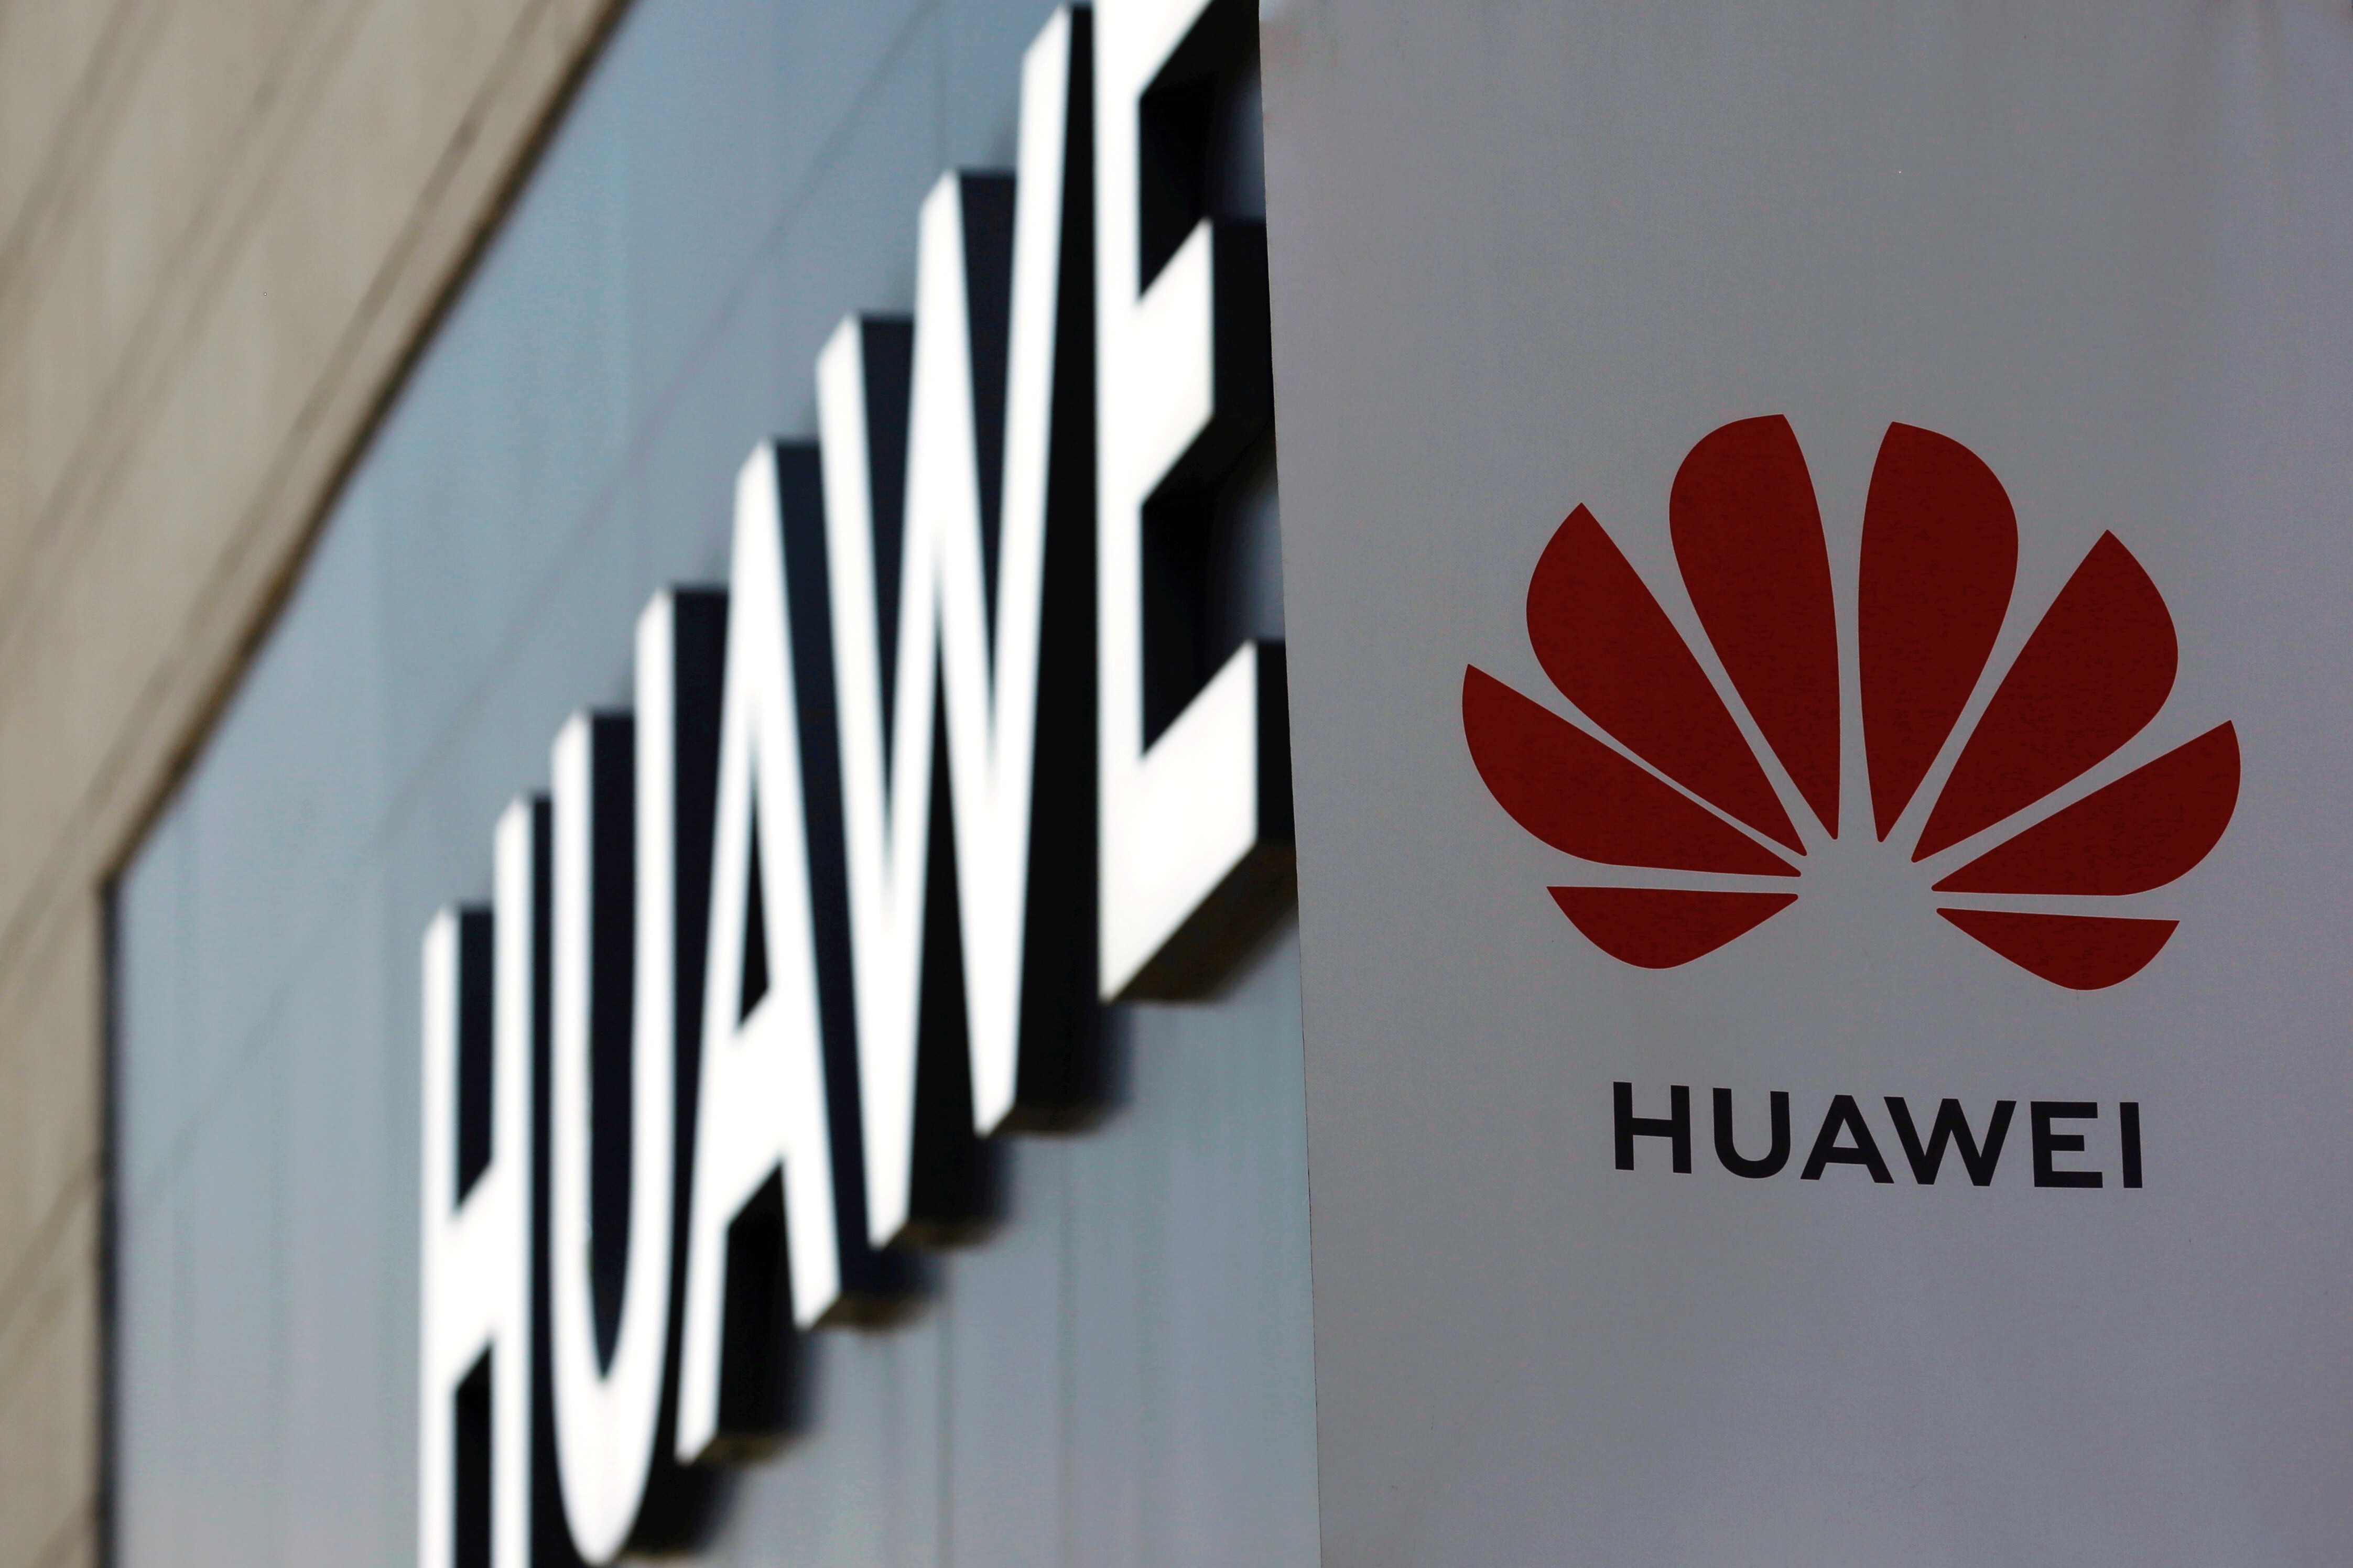 Huawei has largely been barred from doing business in the US. Photo: Reuters